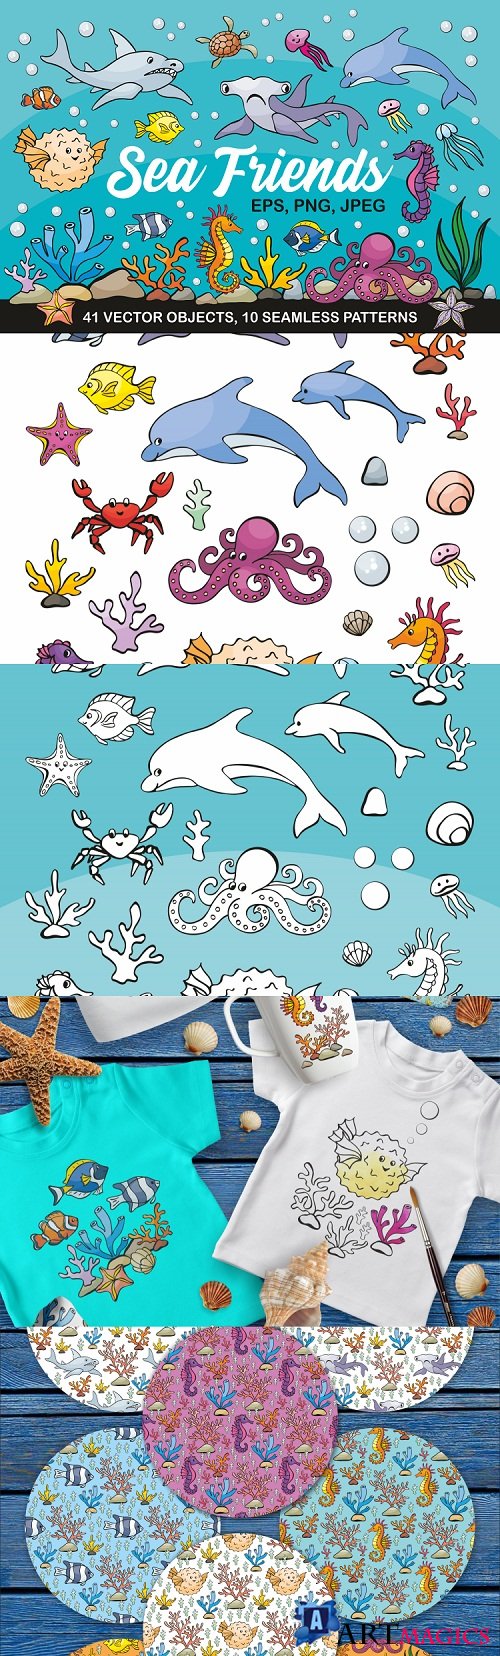 Sea Friends. Vector doodles and seamless patterns - 99246